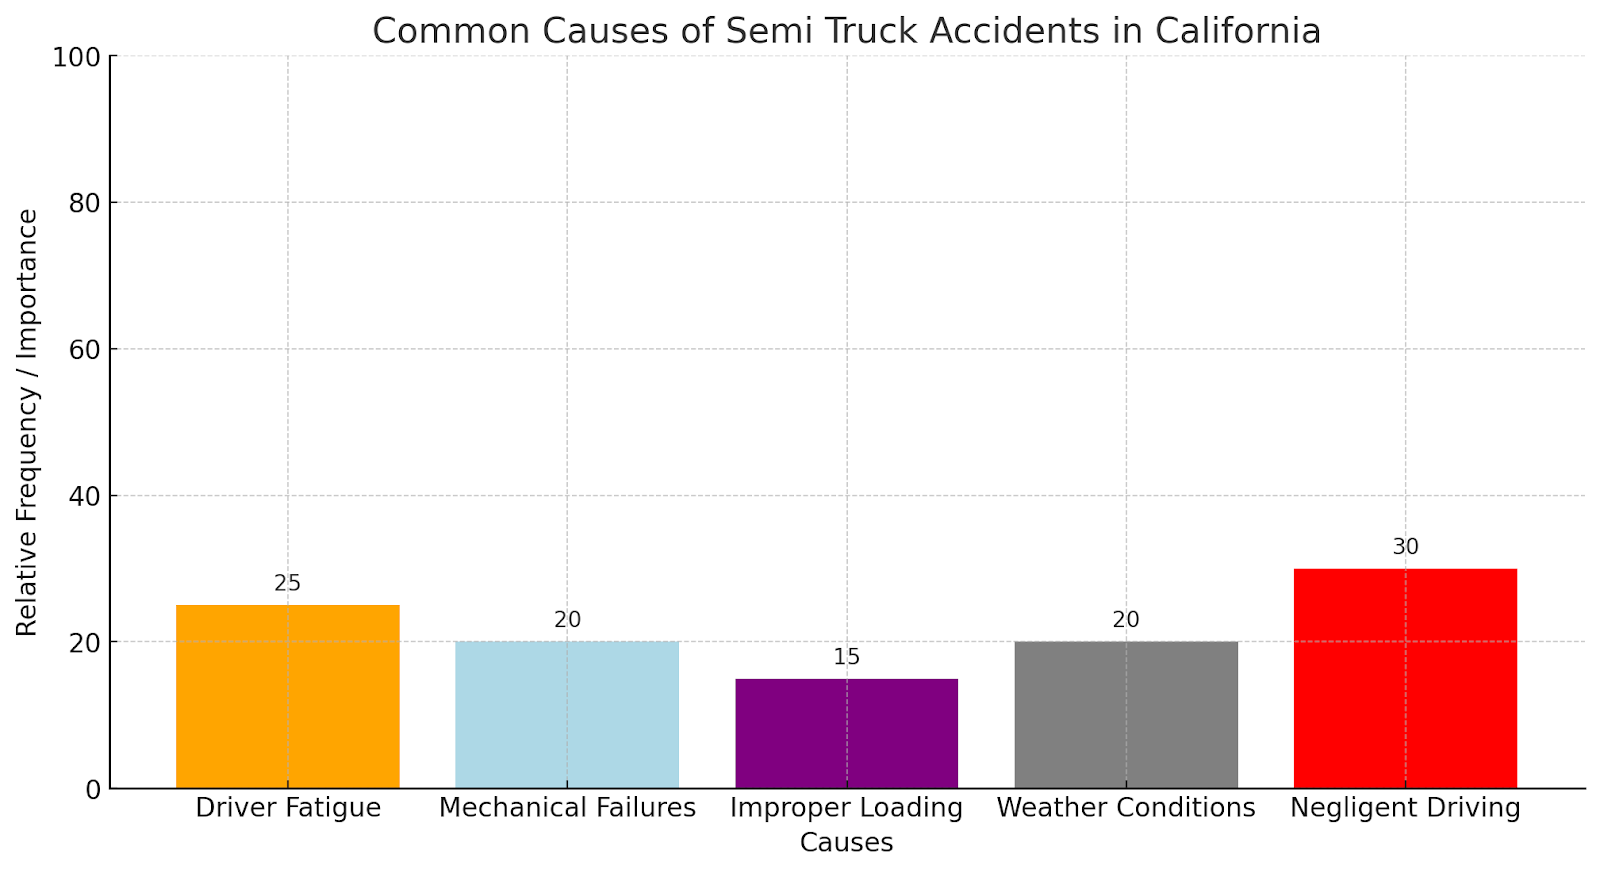 Common Causes of Semi-Truck Accidents